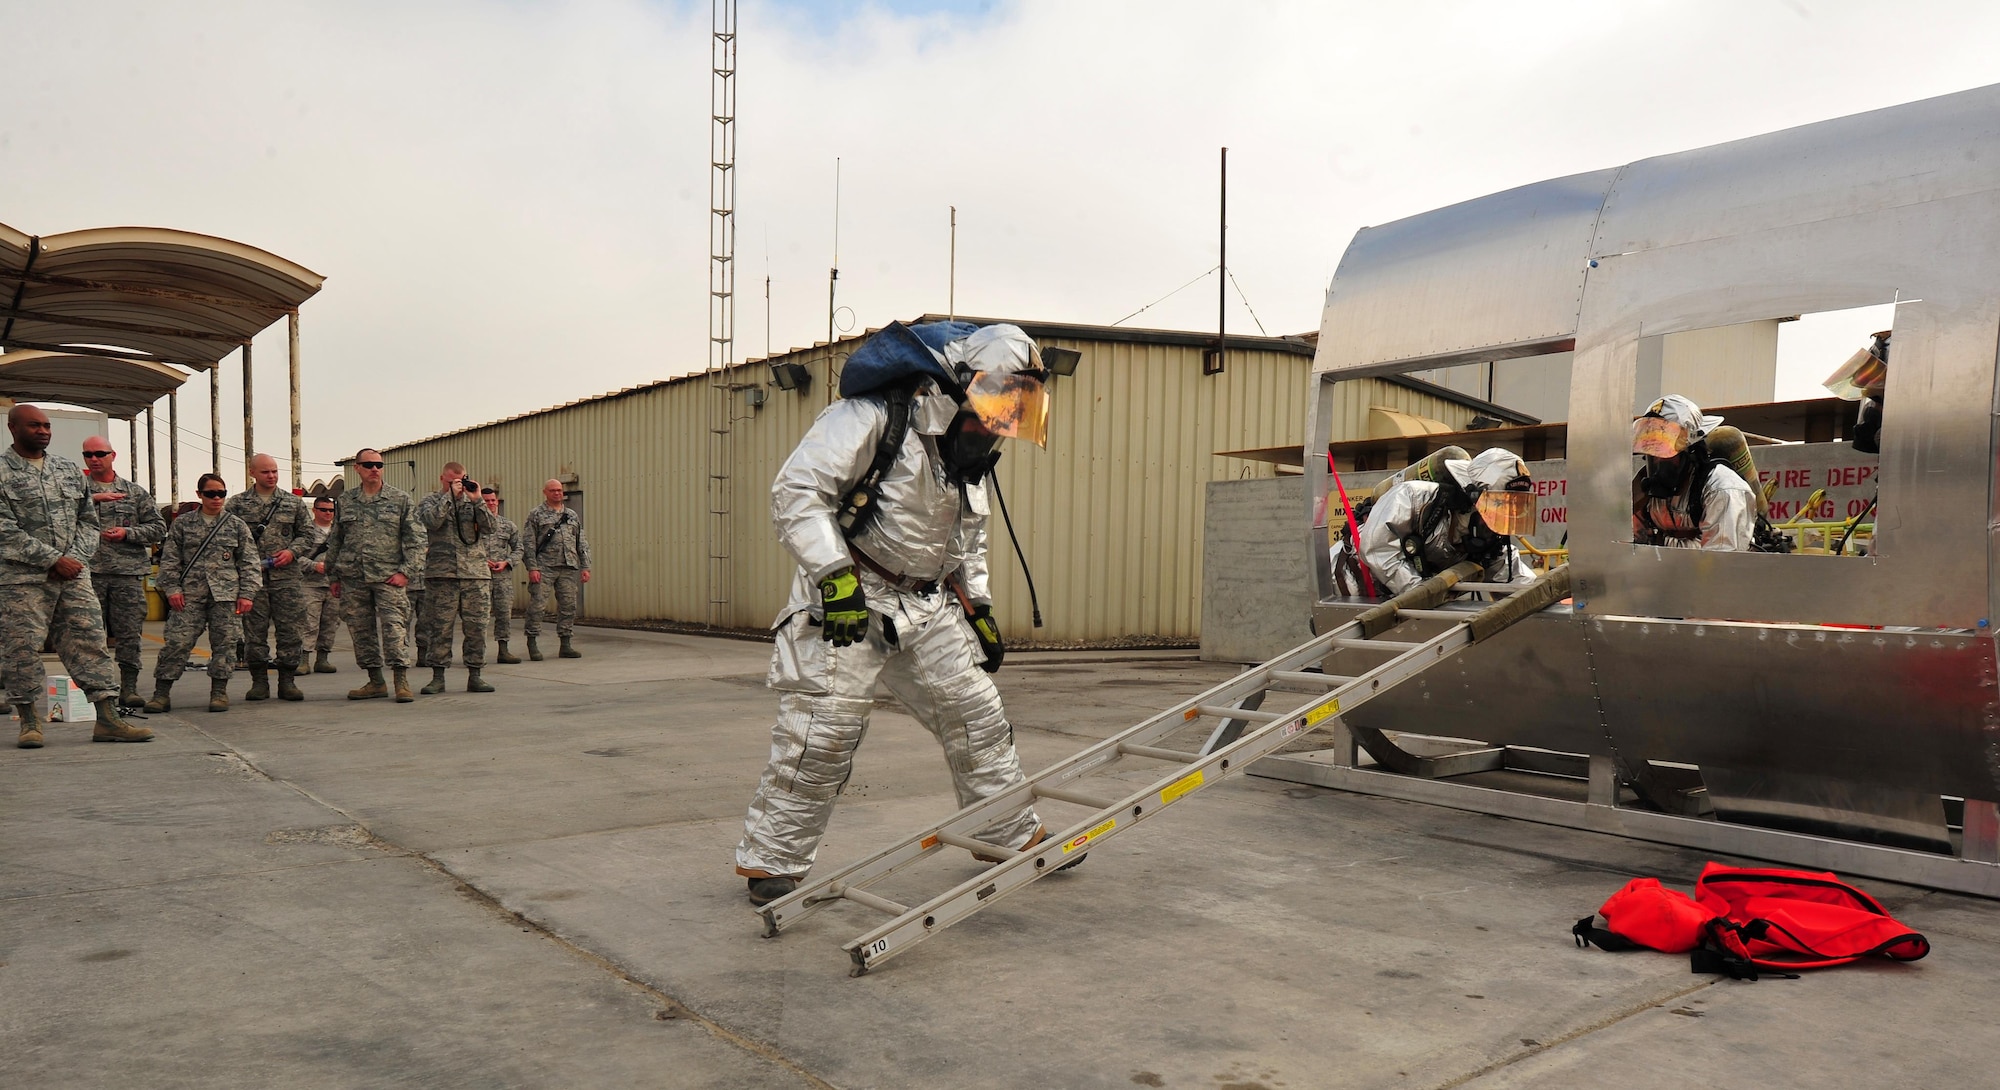 Firefighters from the 380th Expeditionary Civil Engineering Squadron enact a live demonstration of a fire department search and rescue aircraft trainer during a ribbon-cutting ceremony at an undisclosed location in Southwest Asia, Feb. 19. The initial idea for the project came about nearly two months prior when an “idea fairy” approached Tech. Sgt. Scott, 380 ECES Fire Department crash crew chief, with suggestions to developinng the trainer. (U.S. Air Force photo by Staff Sgt. Kentavist P. Brackin/released)